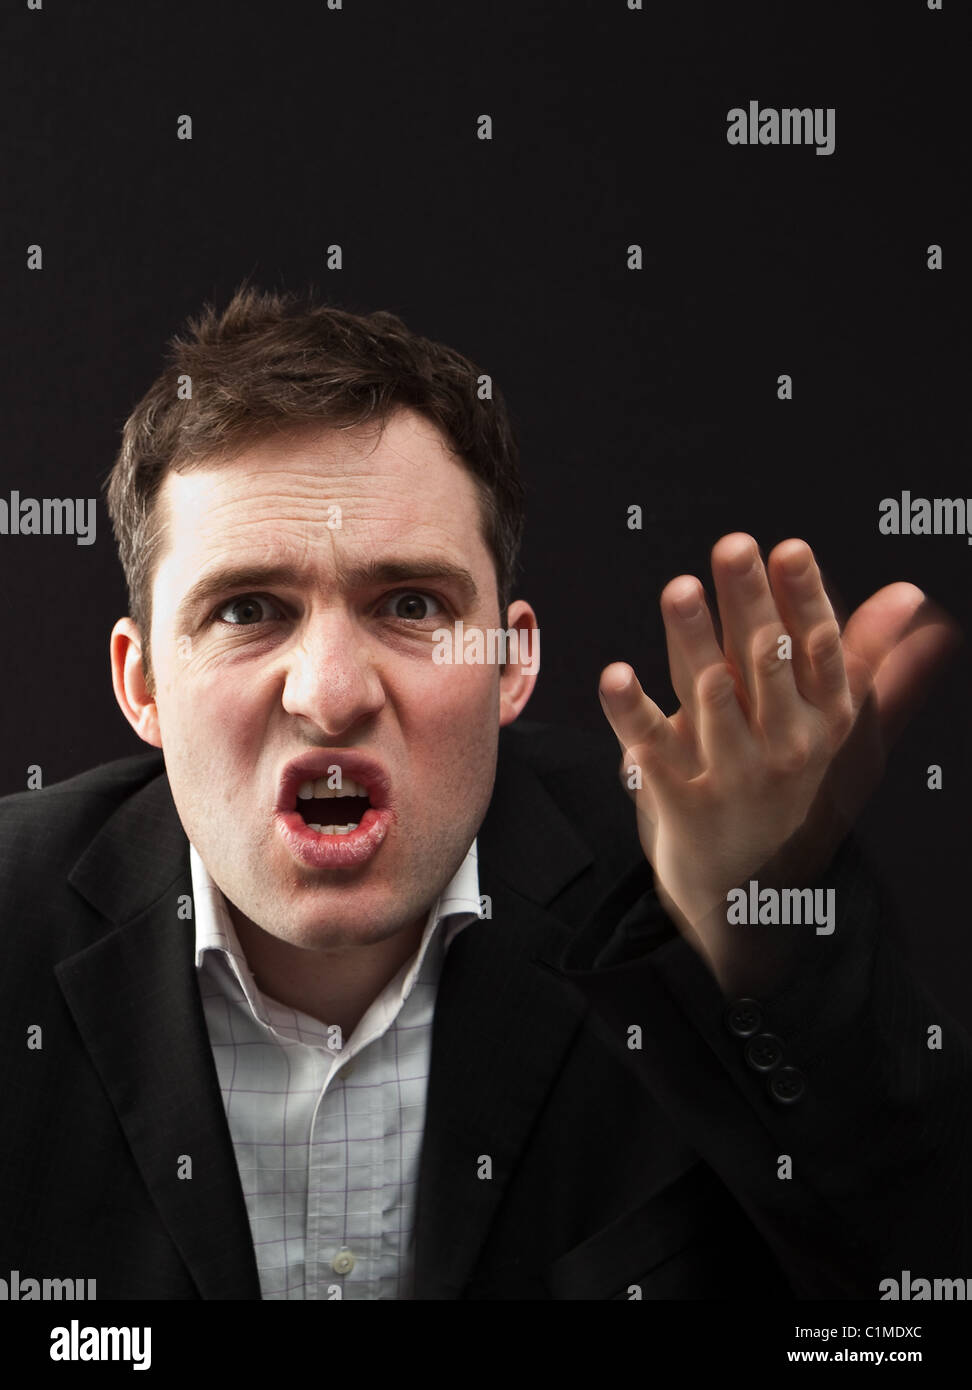 Angry young business man Stock Photo